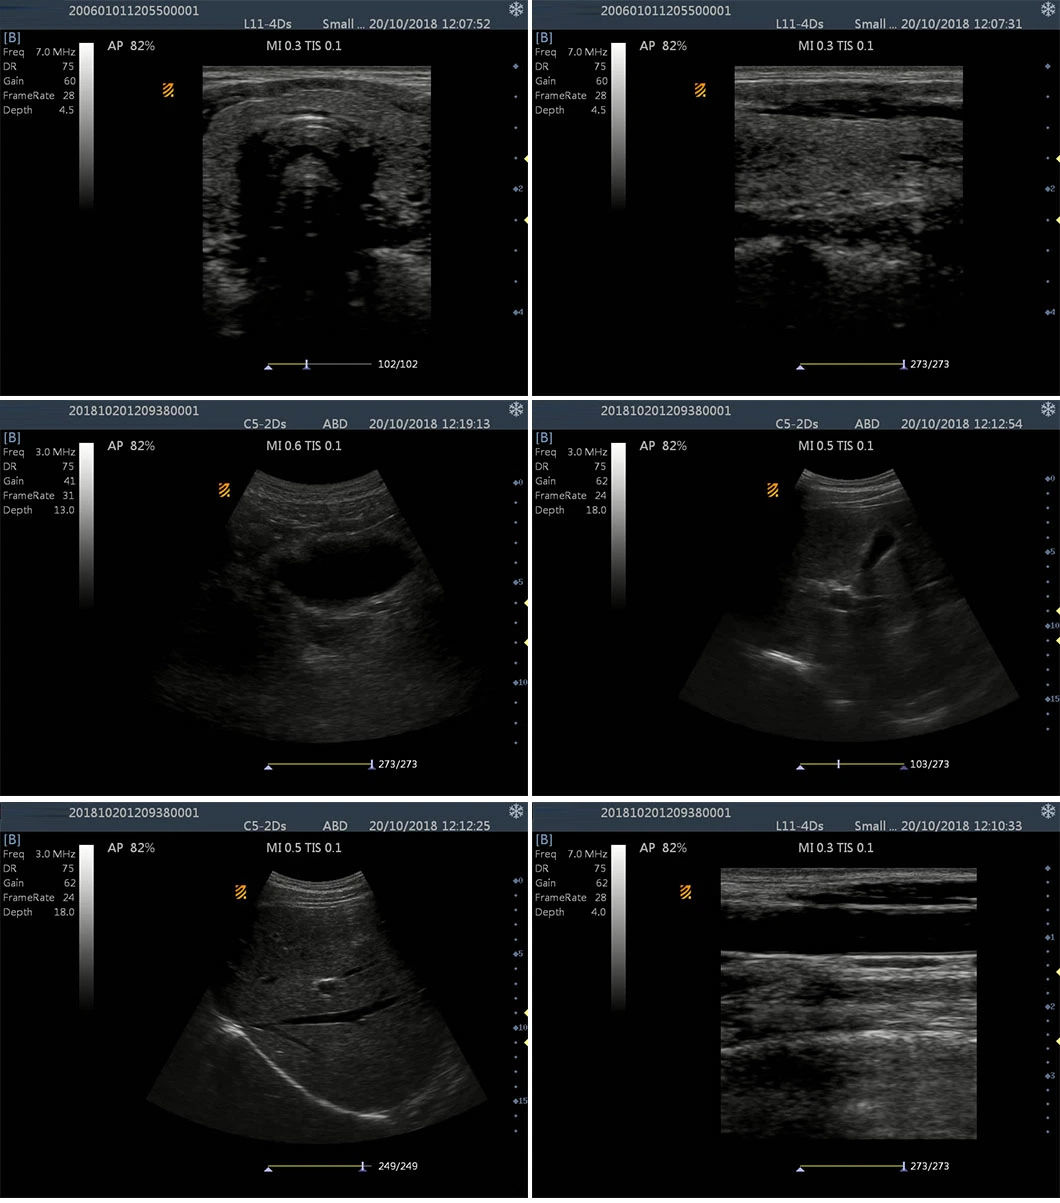 Hospital Clinic Touch Screen B/W Portable Ultrasound Devices with Convex Linear Rectal Probe